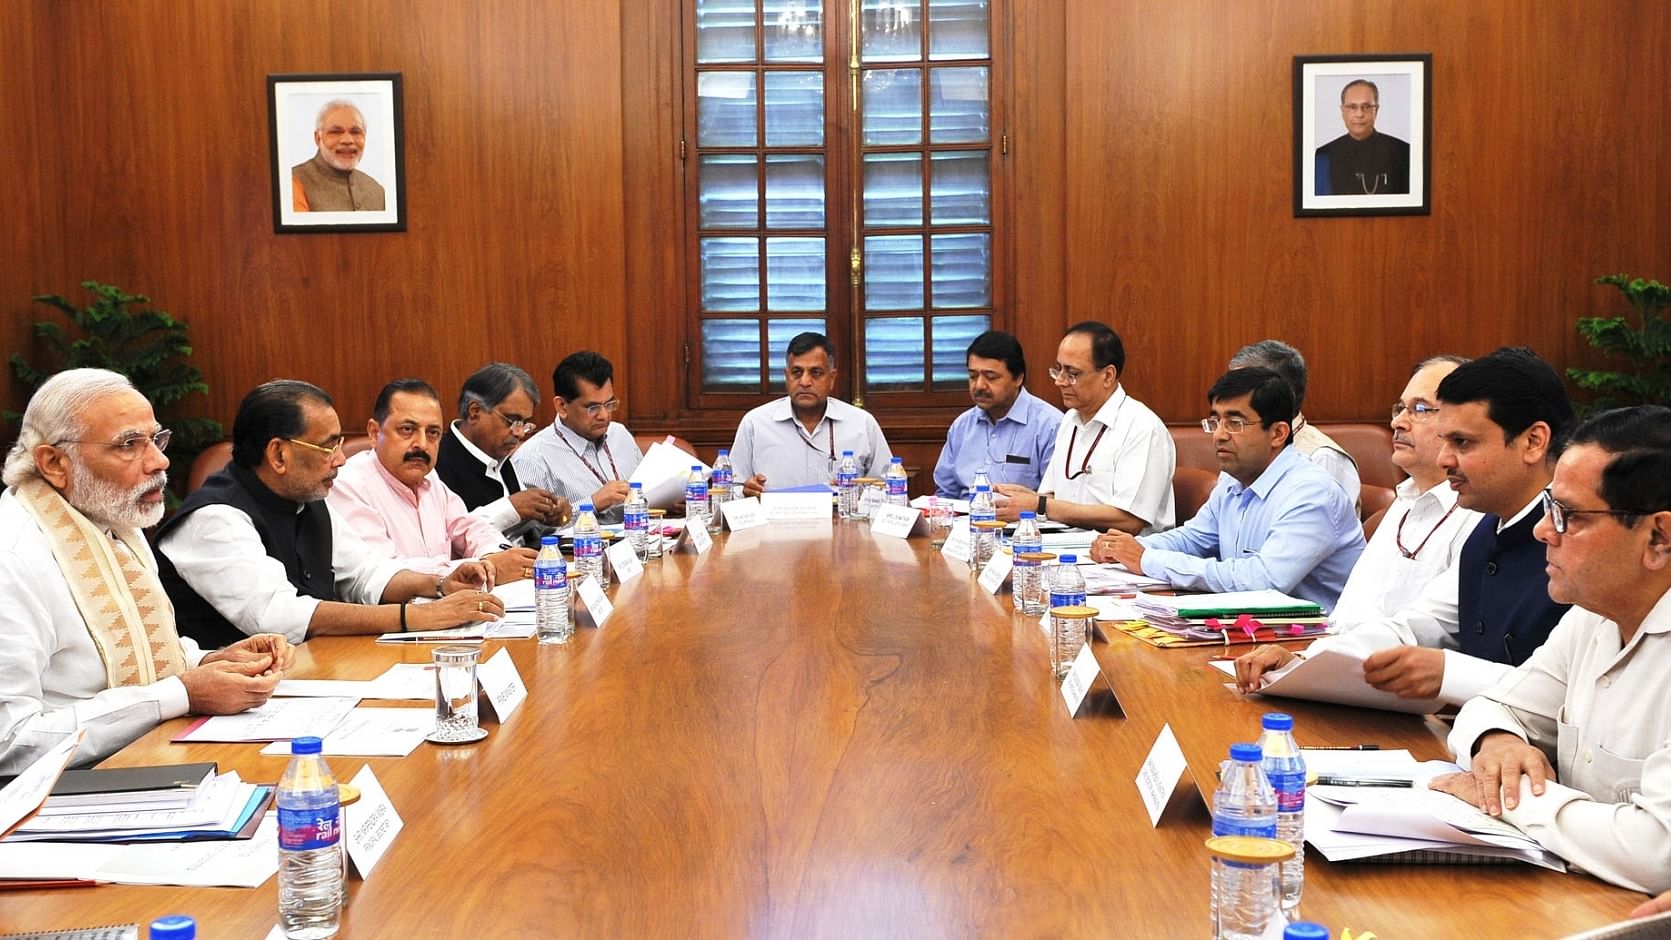 Prime Minister Narendra Modi reviews drought situation at a high level meeting with the Chief Minister of Maharashtra Devendra Fadnavis, in New Delhi. (Photo: IANS/PIB)